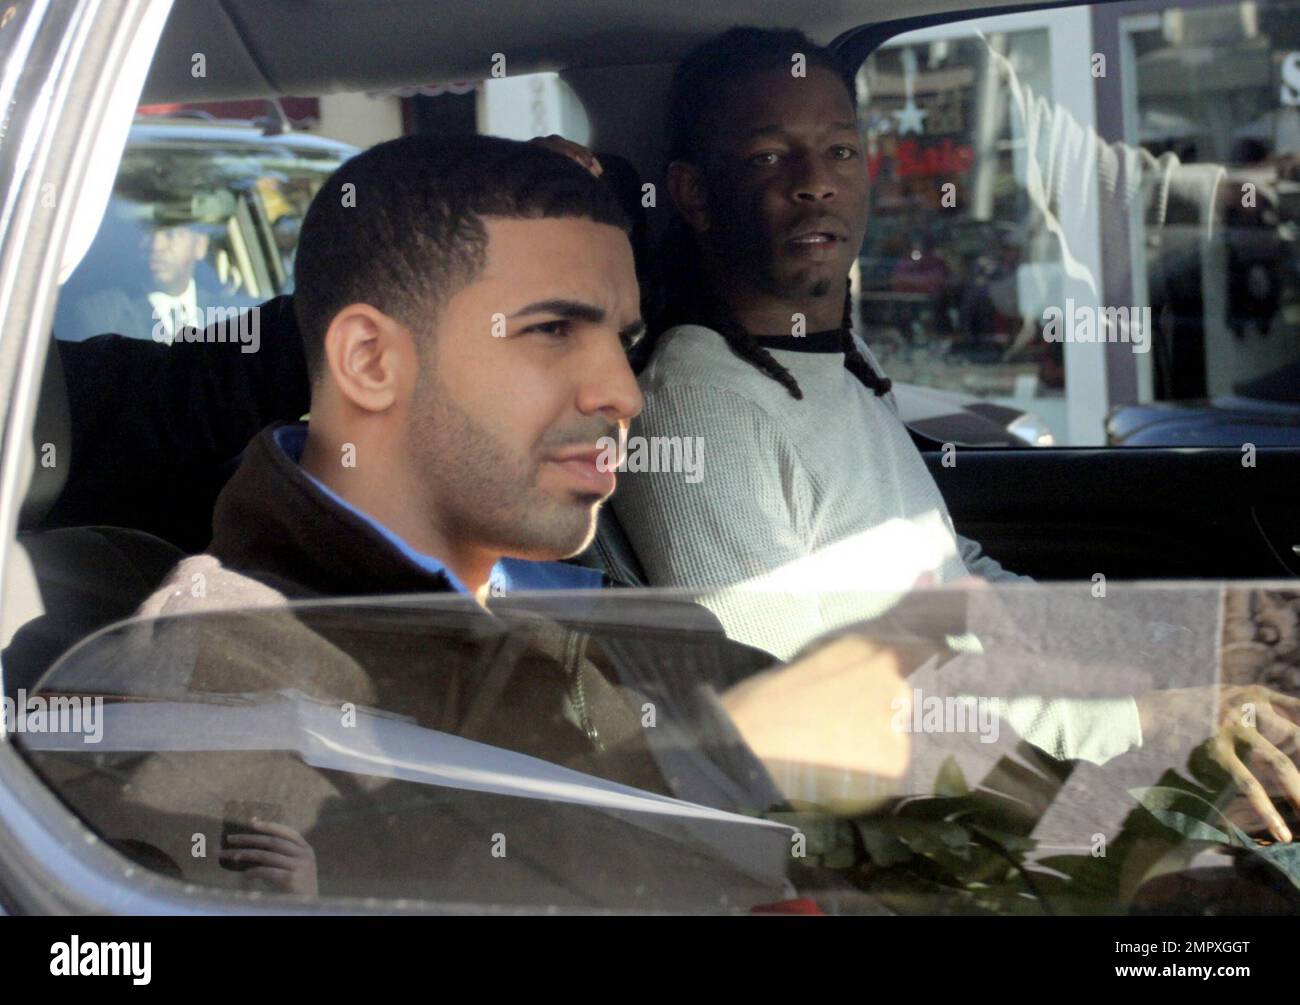 EXCLUSIVE!! Canadian recording artist and actor Aubrey 'Drake' Graham, better known as Drake, was seen having lunch at a restaurant in Beverly Hills. The actor who originally became known for the role of Jimmy Brooks on the TV series, 'Degrassi: The Next Generation,' appeared to have gotten fed up with the photographers and flashed them the finger as he drove off in his chauffeur driven vehicle. Its been reported that Drake and Justin Bieber will be hitting the recording studio in January to collaborate on a track for Bieber's new album, 'Believe.' When describing Bieber's musical abilities, D Stock Photo